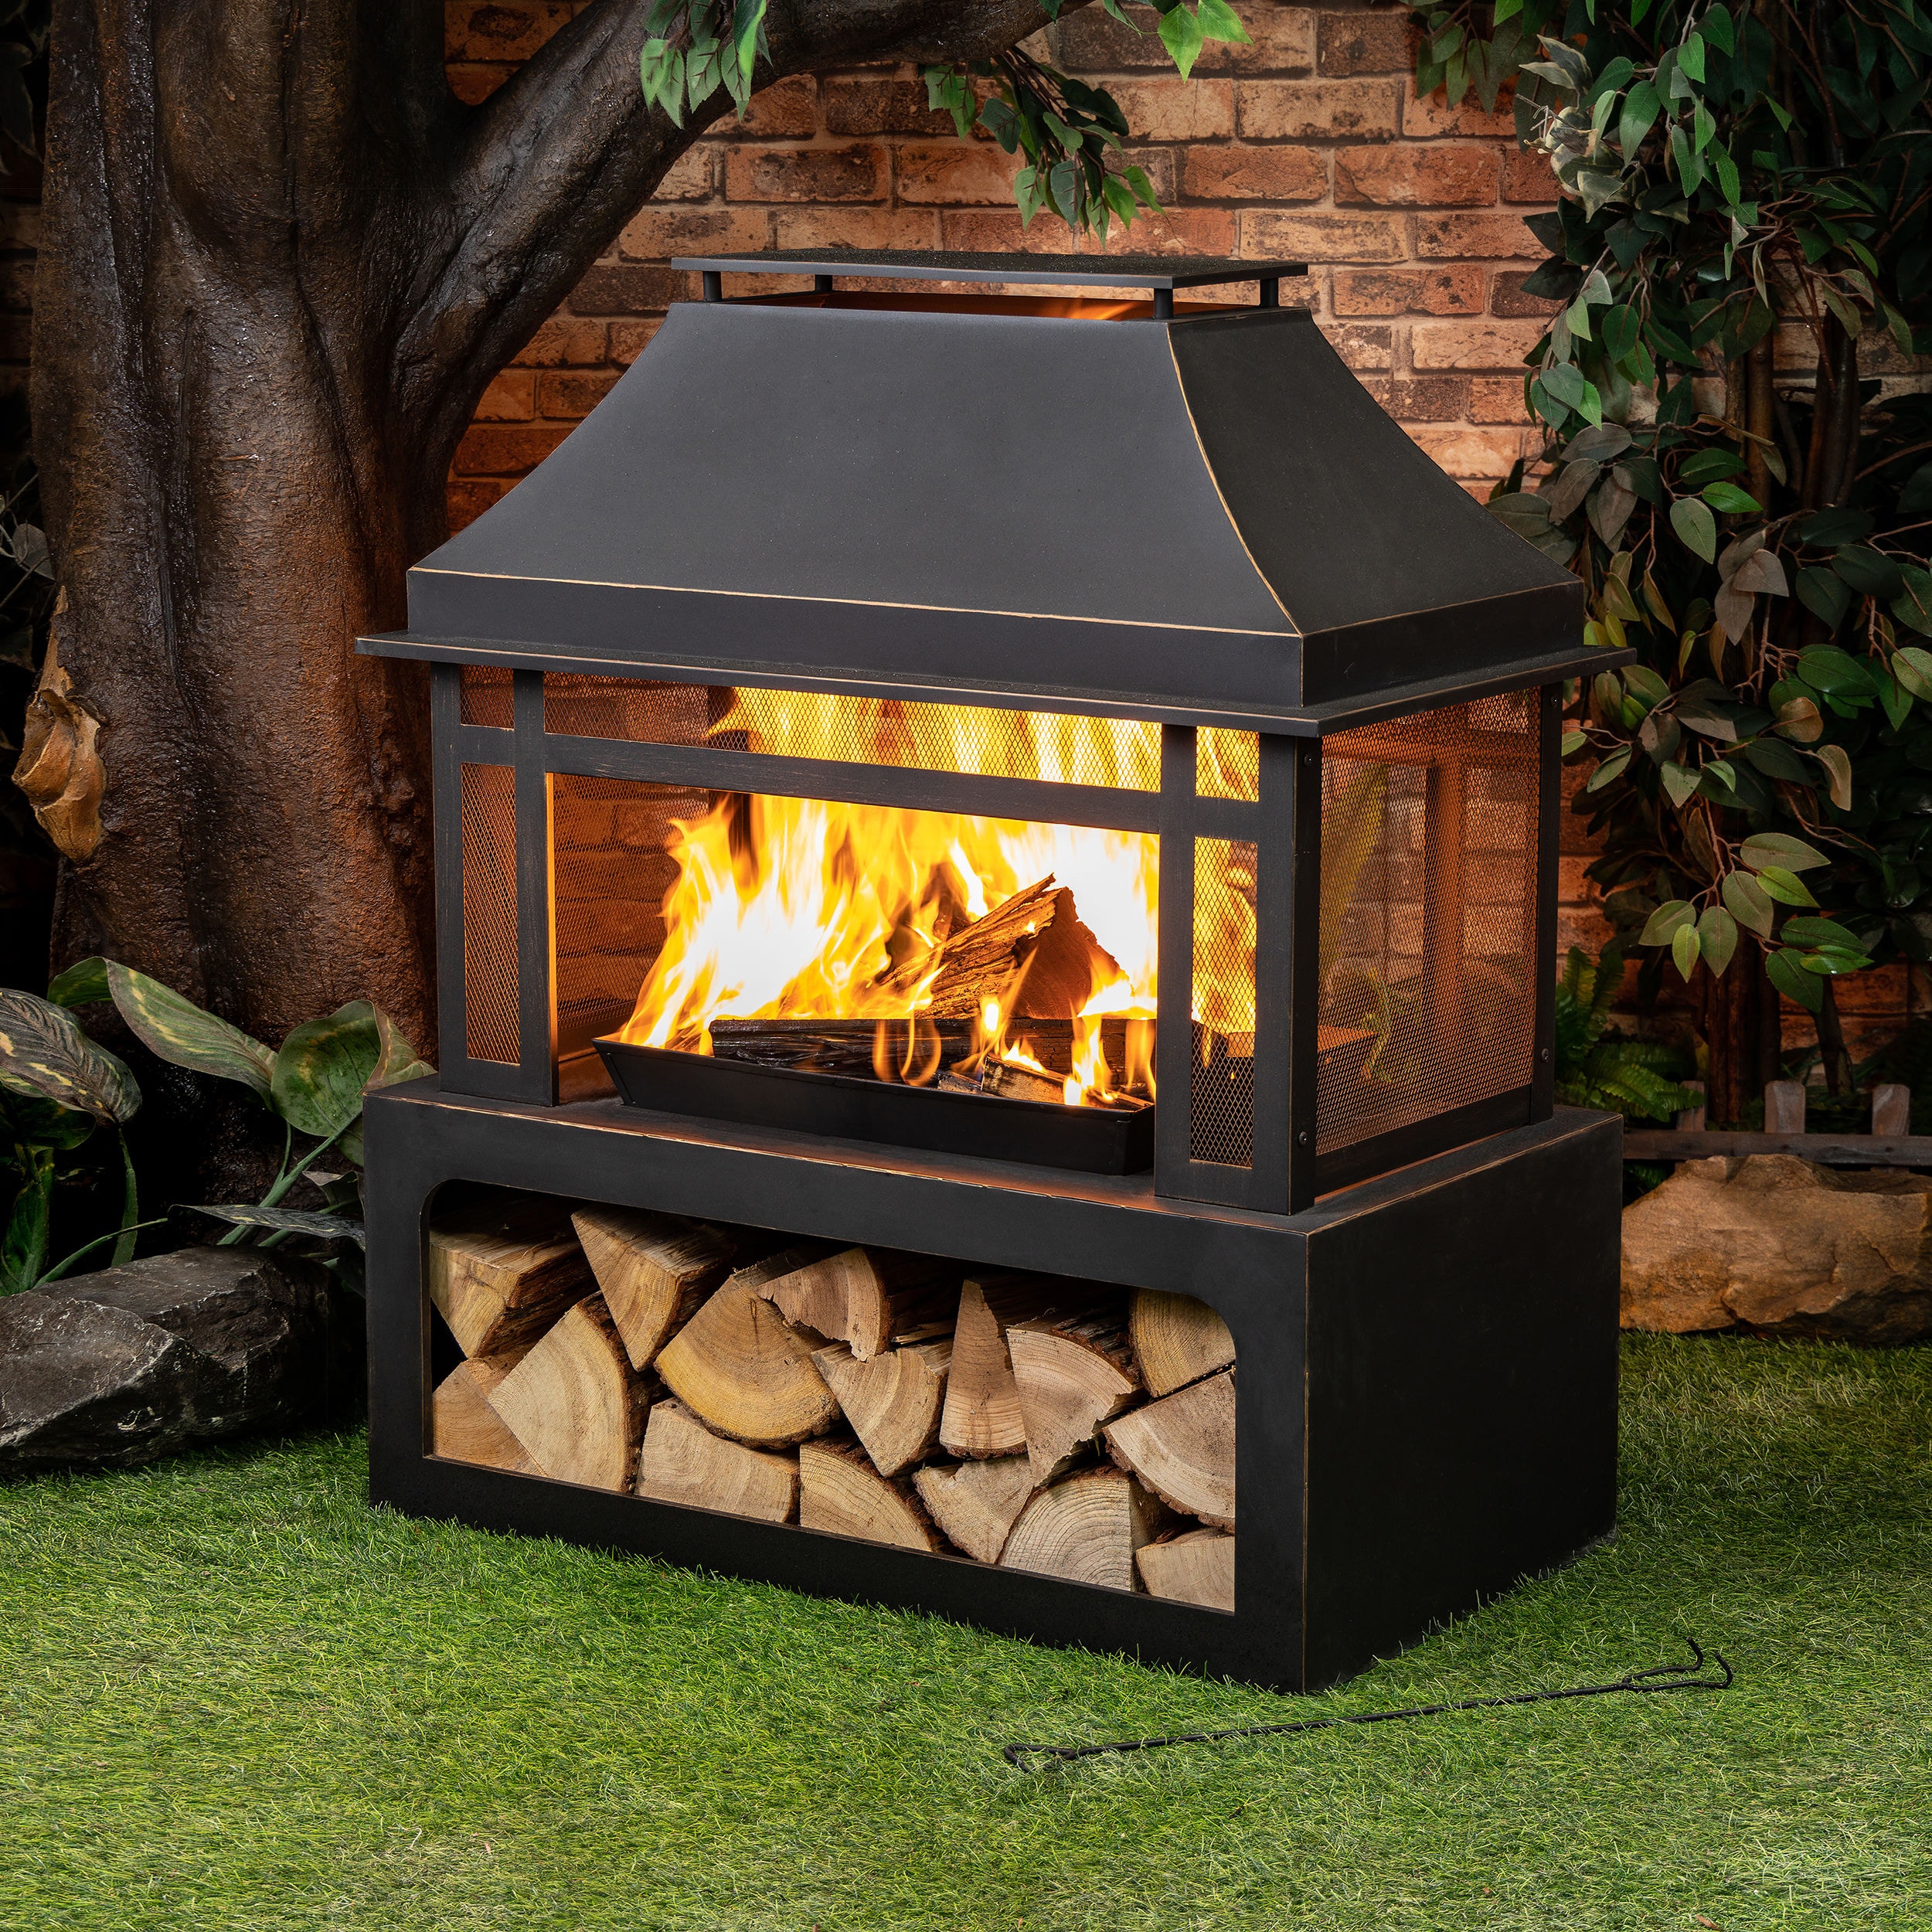 8 STUNNING Outdoor Fire Pits For Cooler Weather